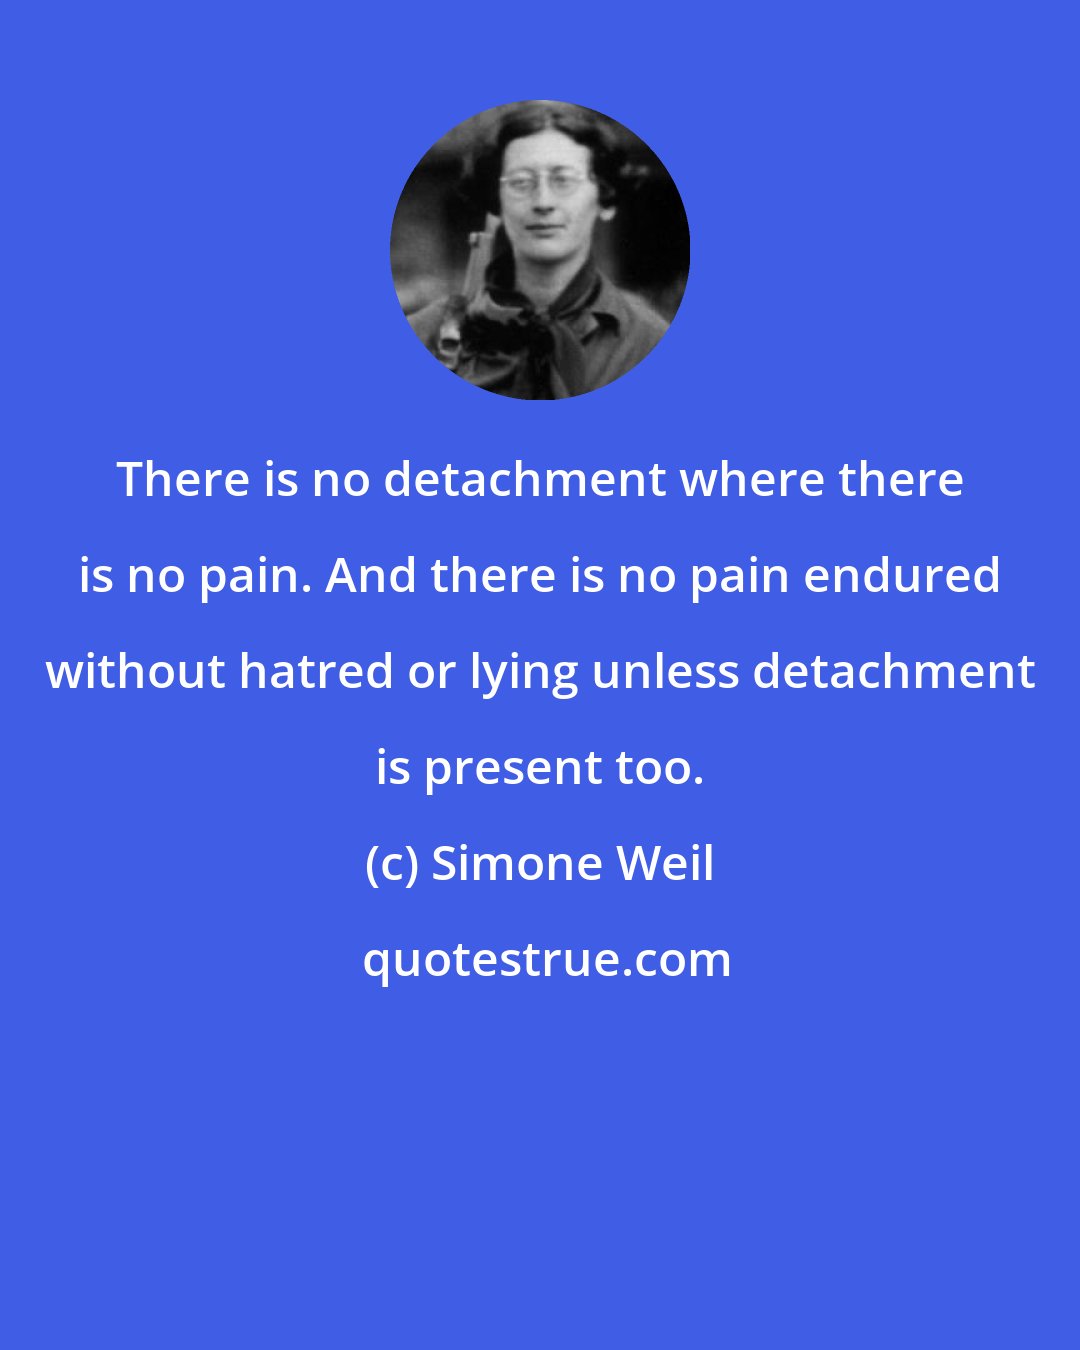 Simone Weil: There is no detachment where there is no pain. And there is no pain endured without hatred or lying unless detachment is present too.